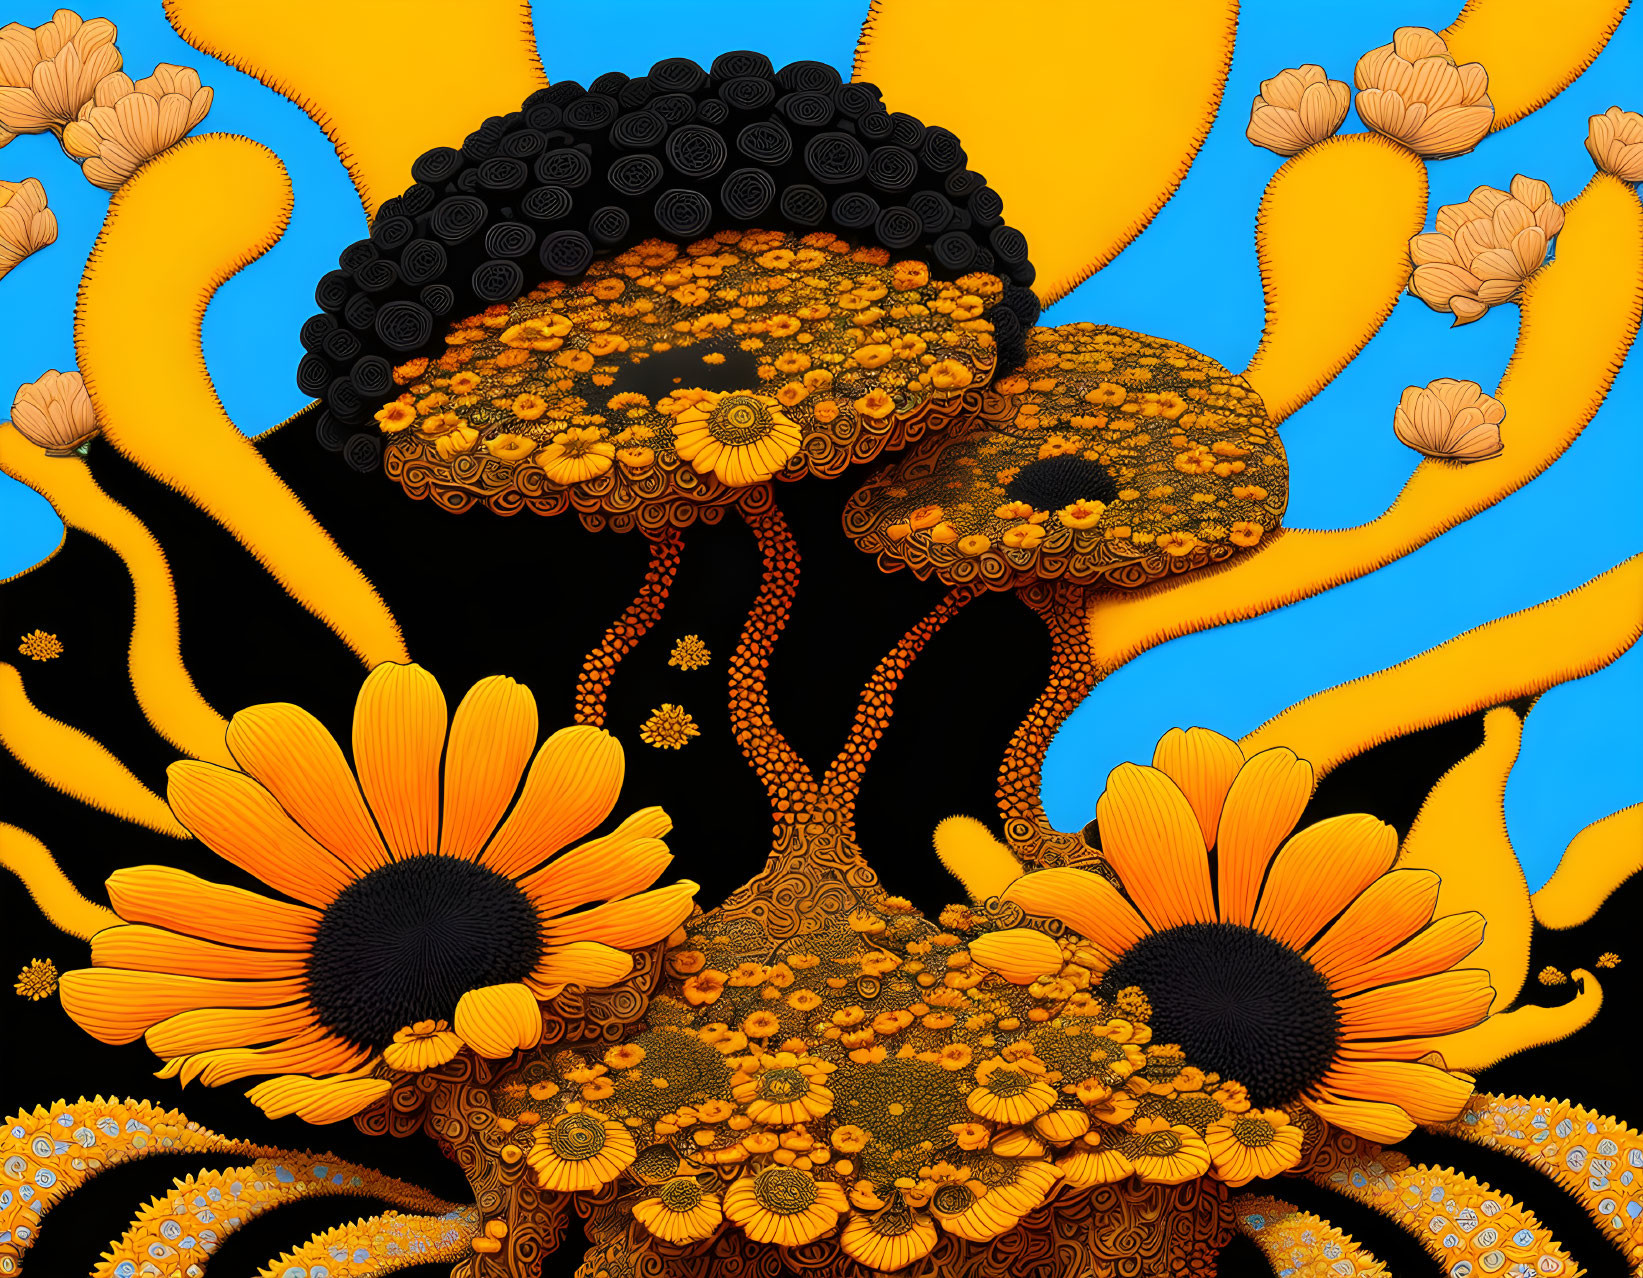 Colorful stylized image of two figures in swirling patterns and orange flowers on blue background